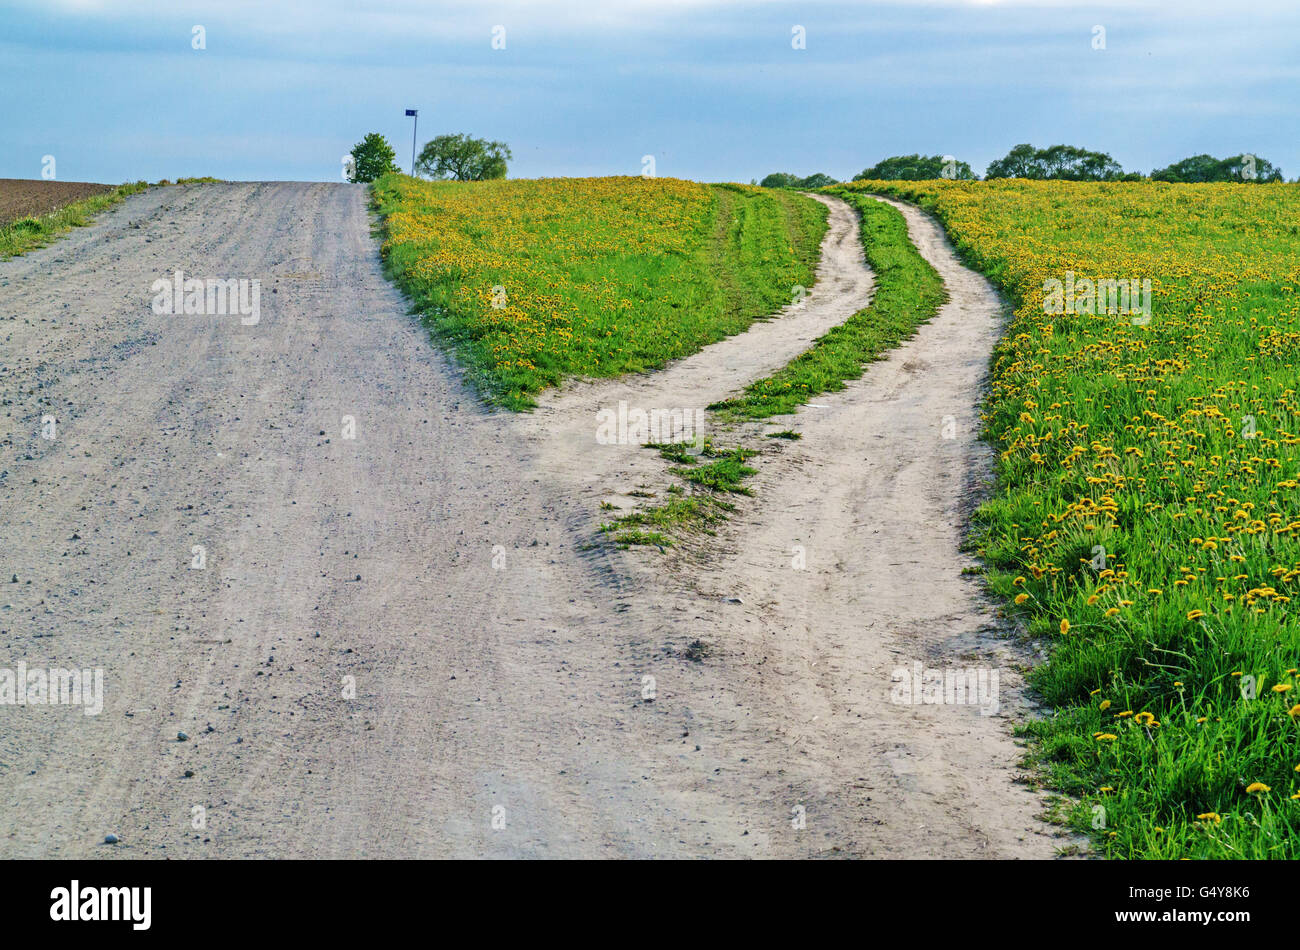 Ground road through agricultural fields.Along the road plowed brown fields and green grass fields. Stock Photo